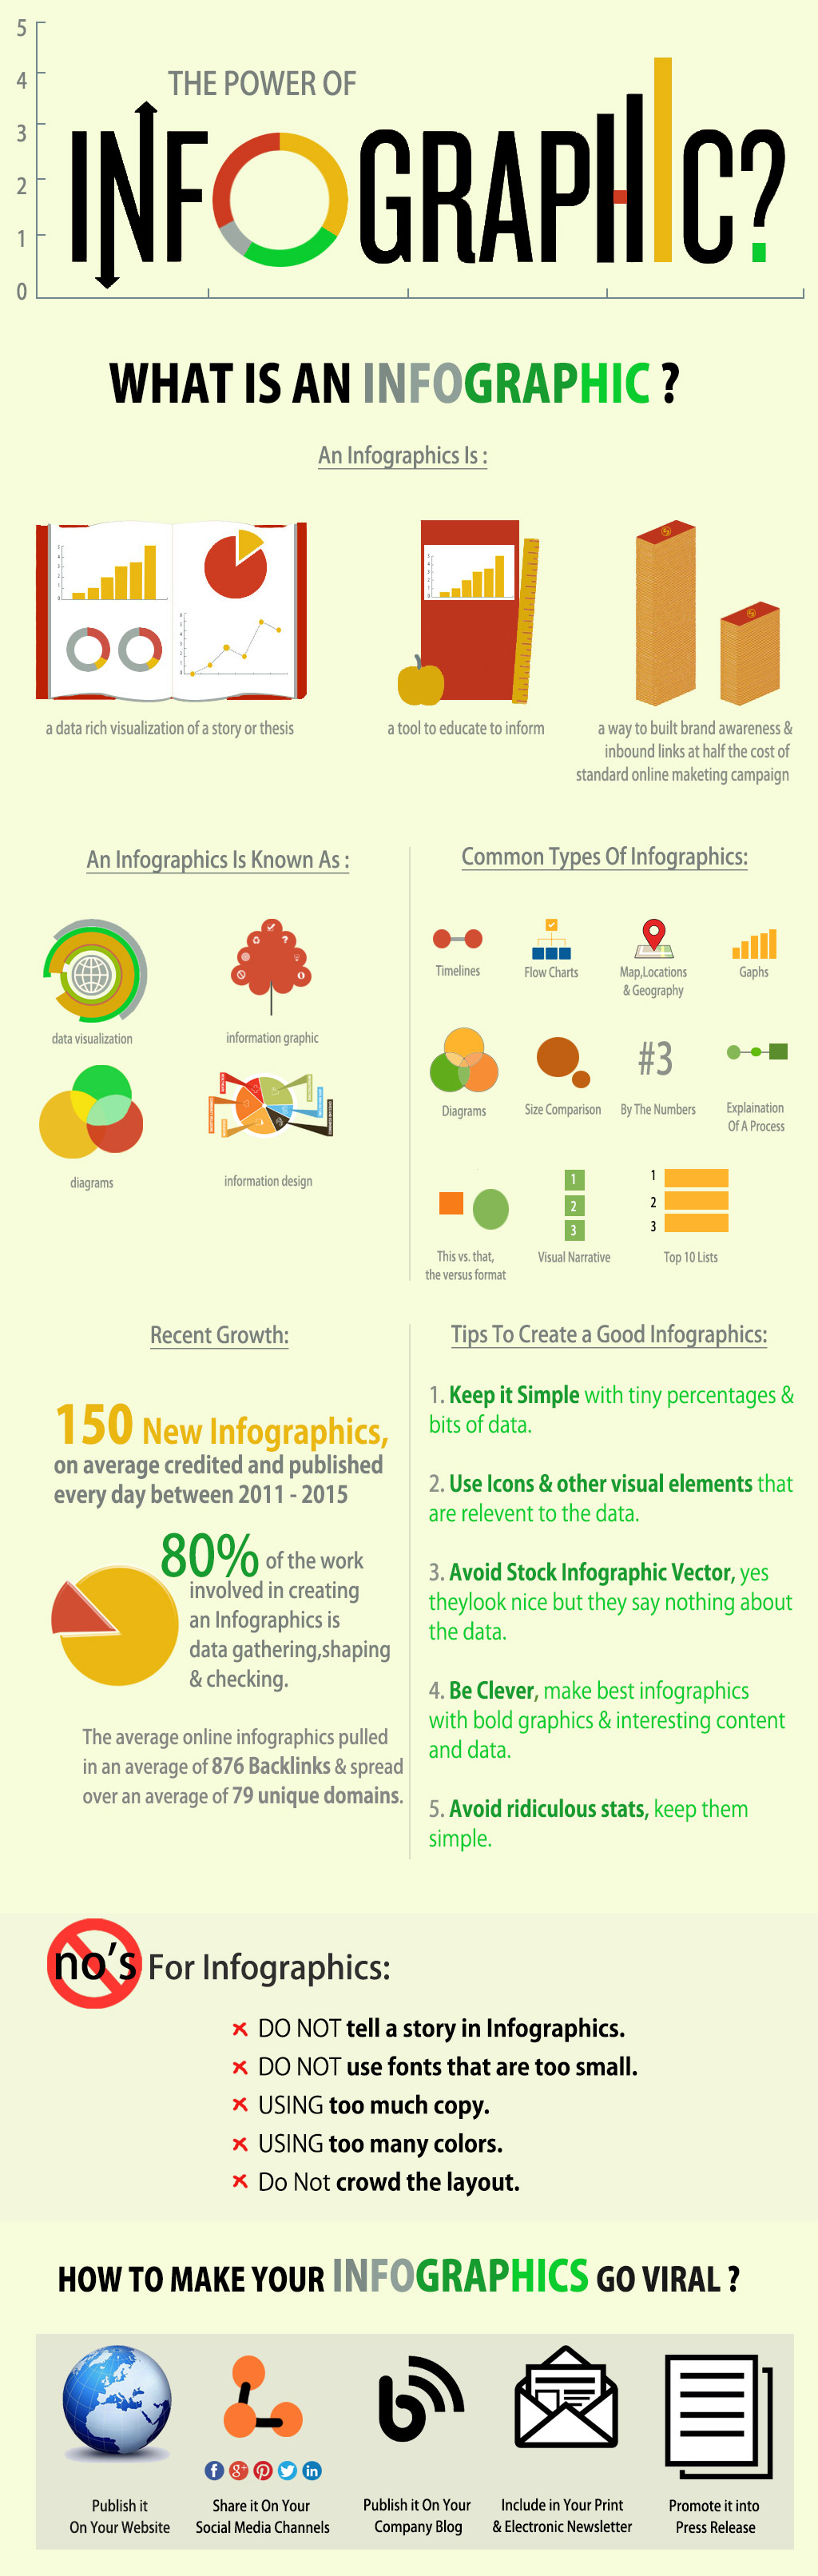 Importance of infographics